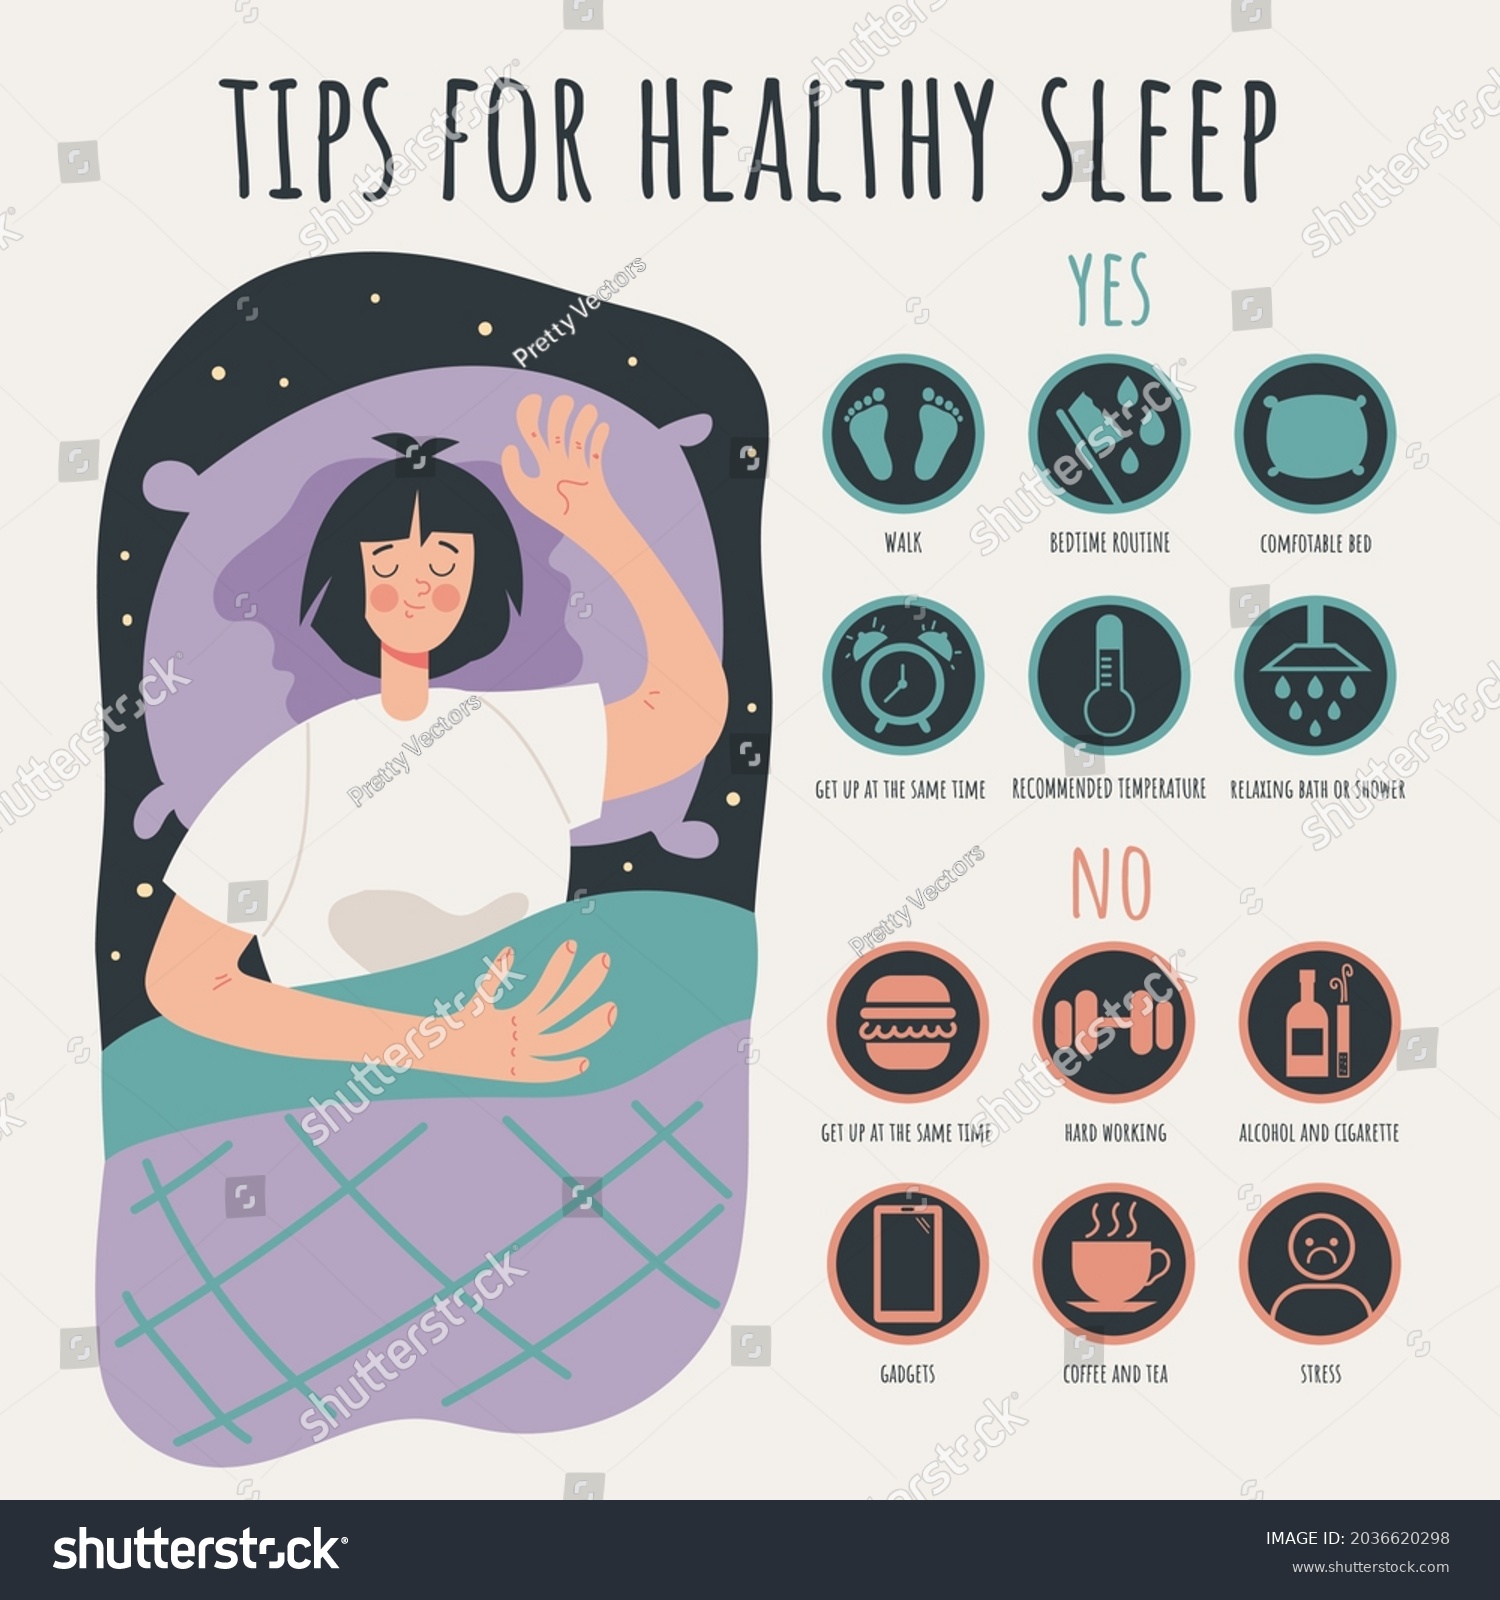 Tips Rules Healthy Sleep Infographic Concept Stock Vector Royalty Free 2036620298 Shutterstock 